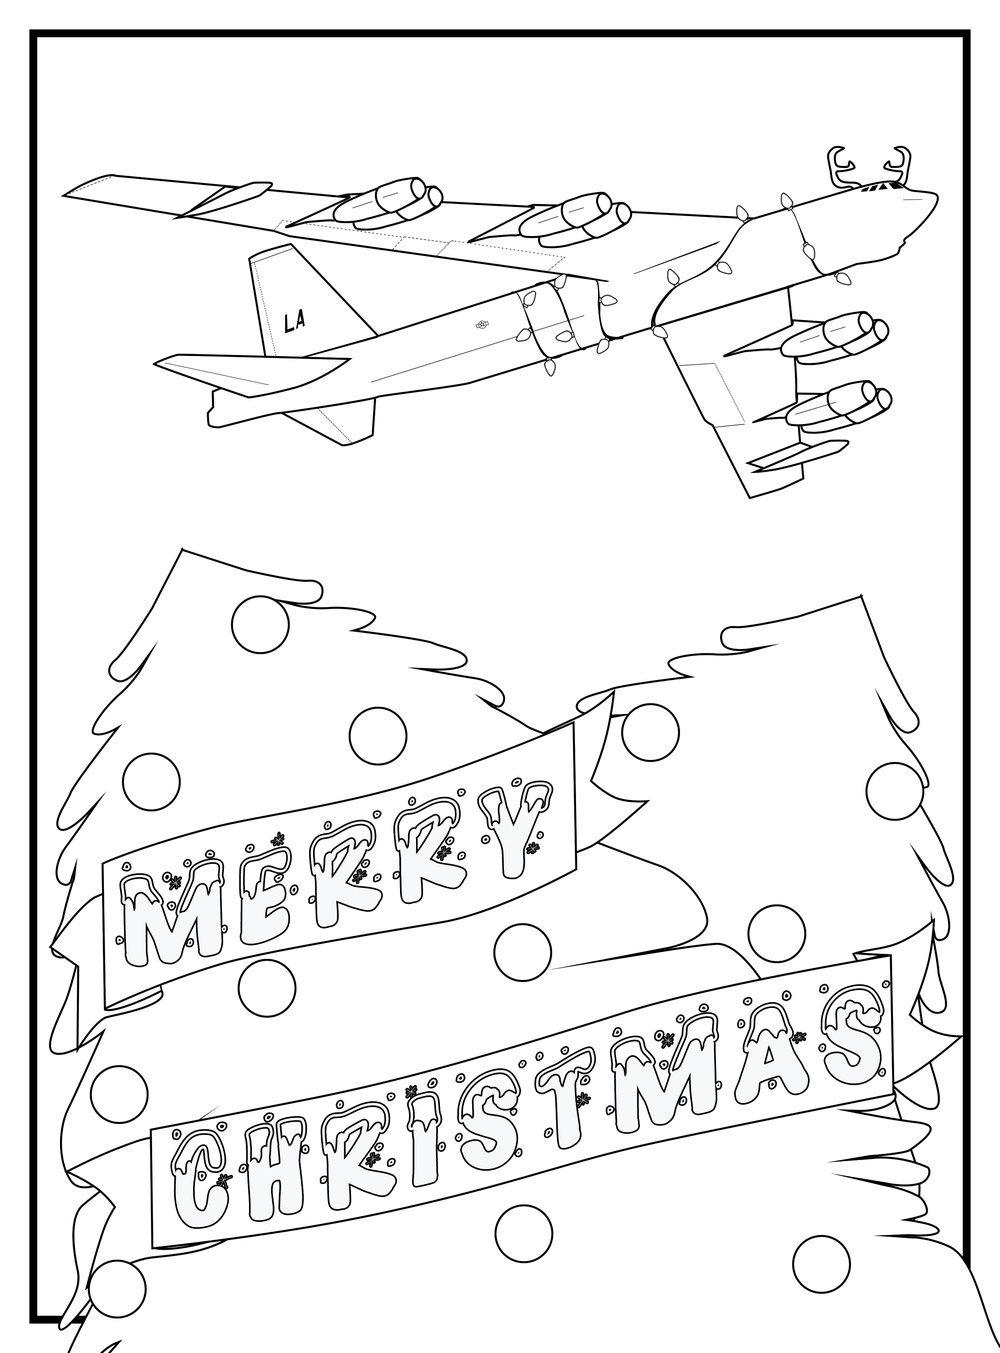 Barksdale Coloring Page